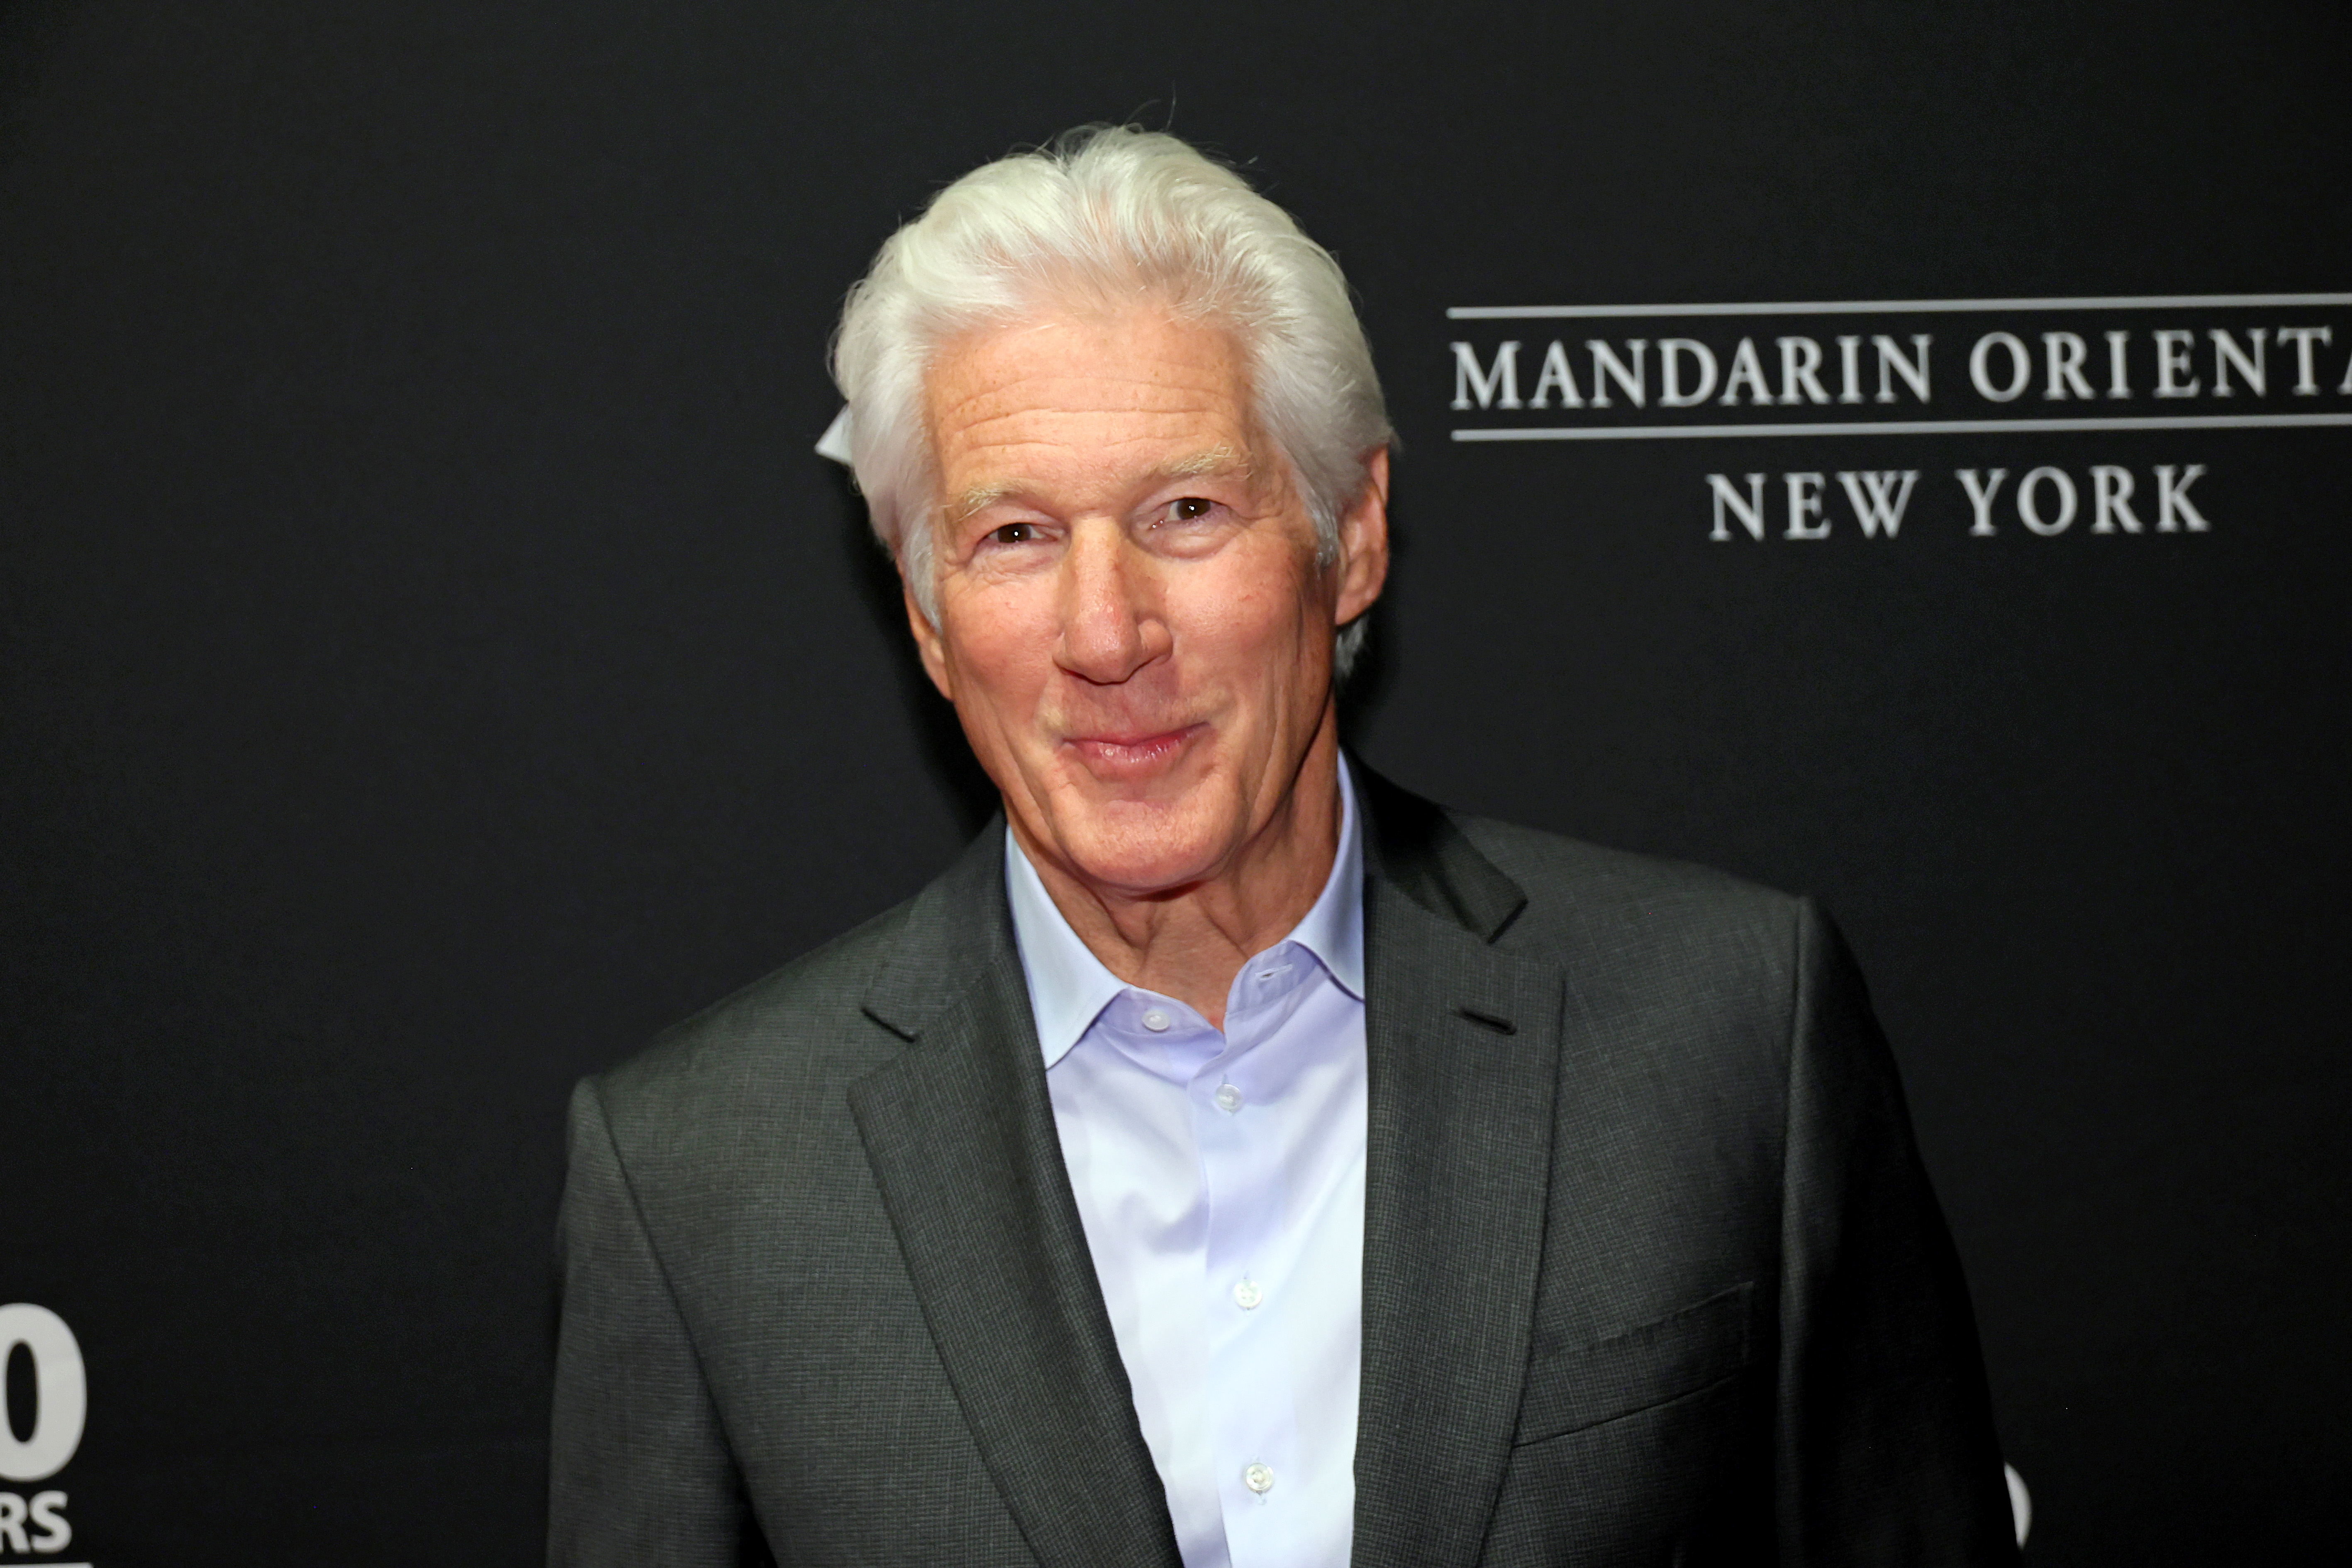 Richard Gere at the City Harvest 40th Anniversary Gala in New York City on April 25, 2023 | Source: Getty Images